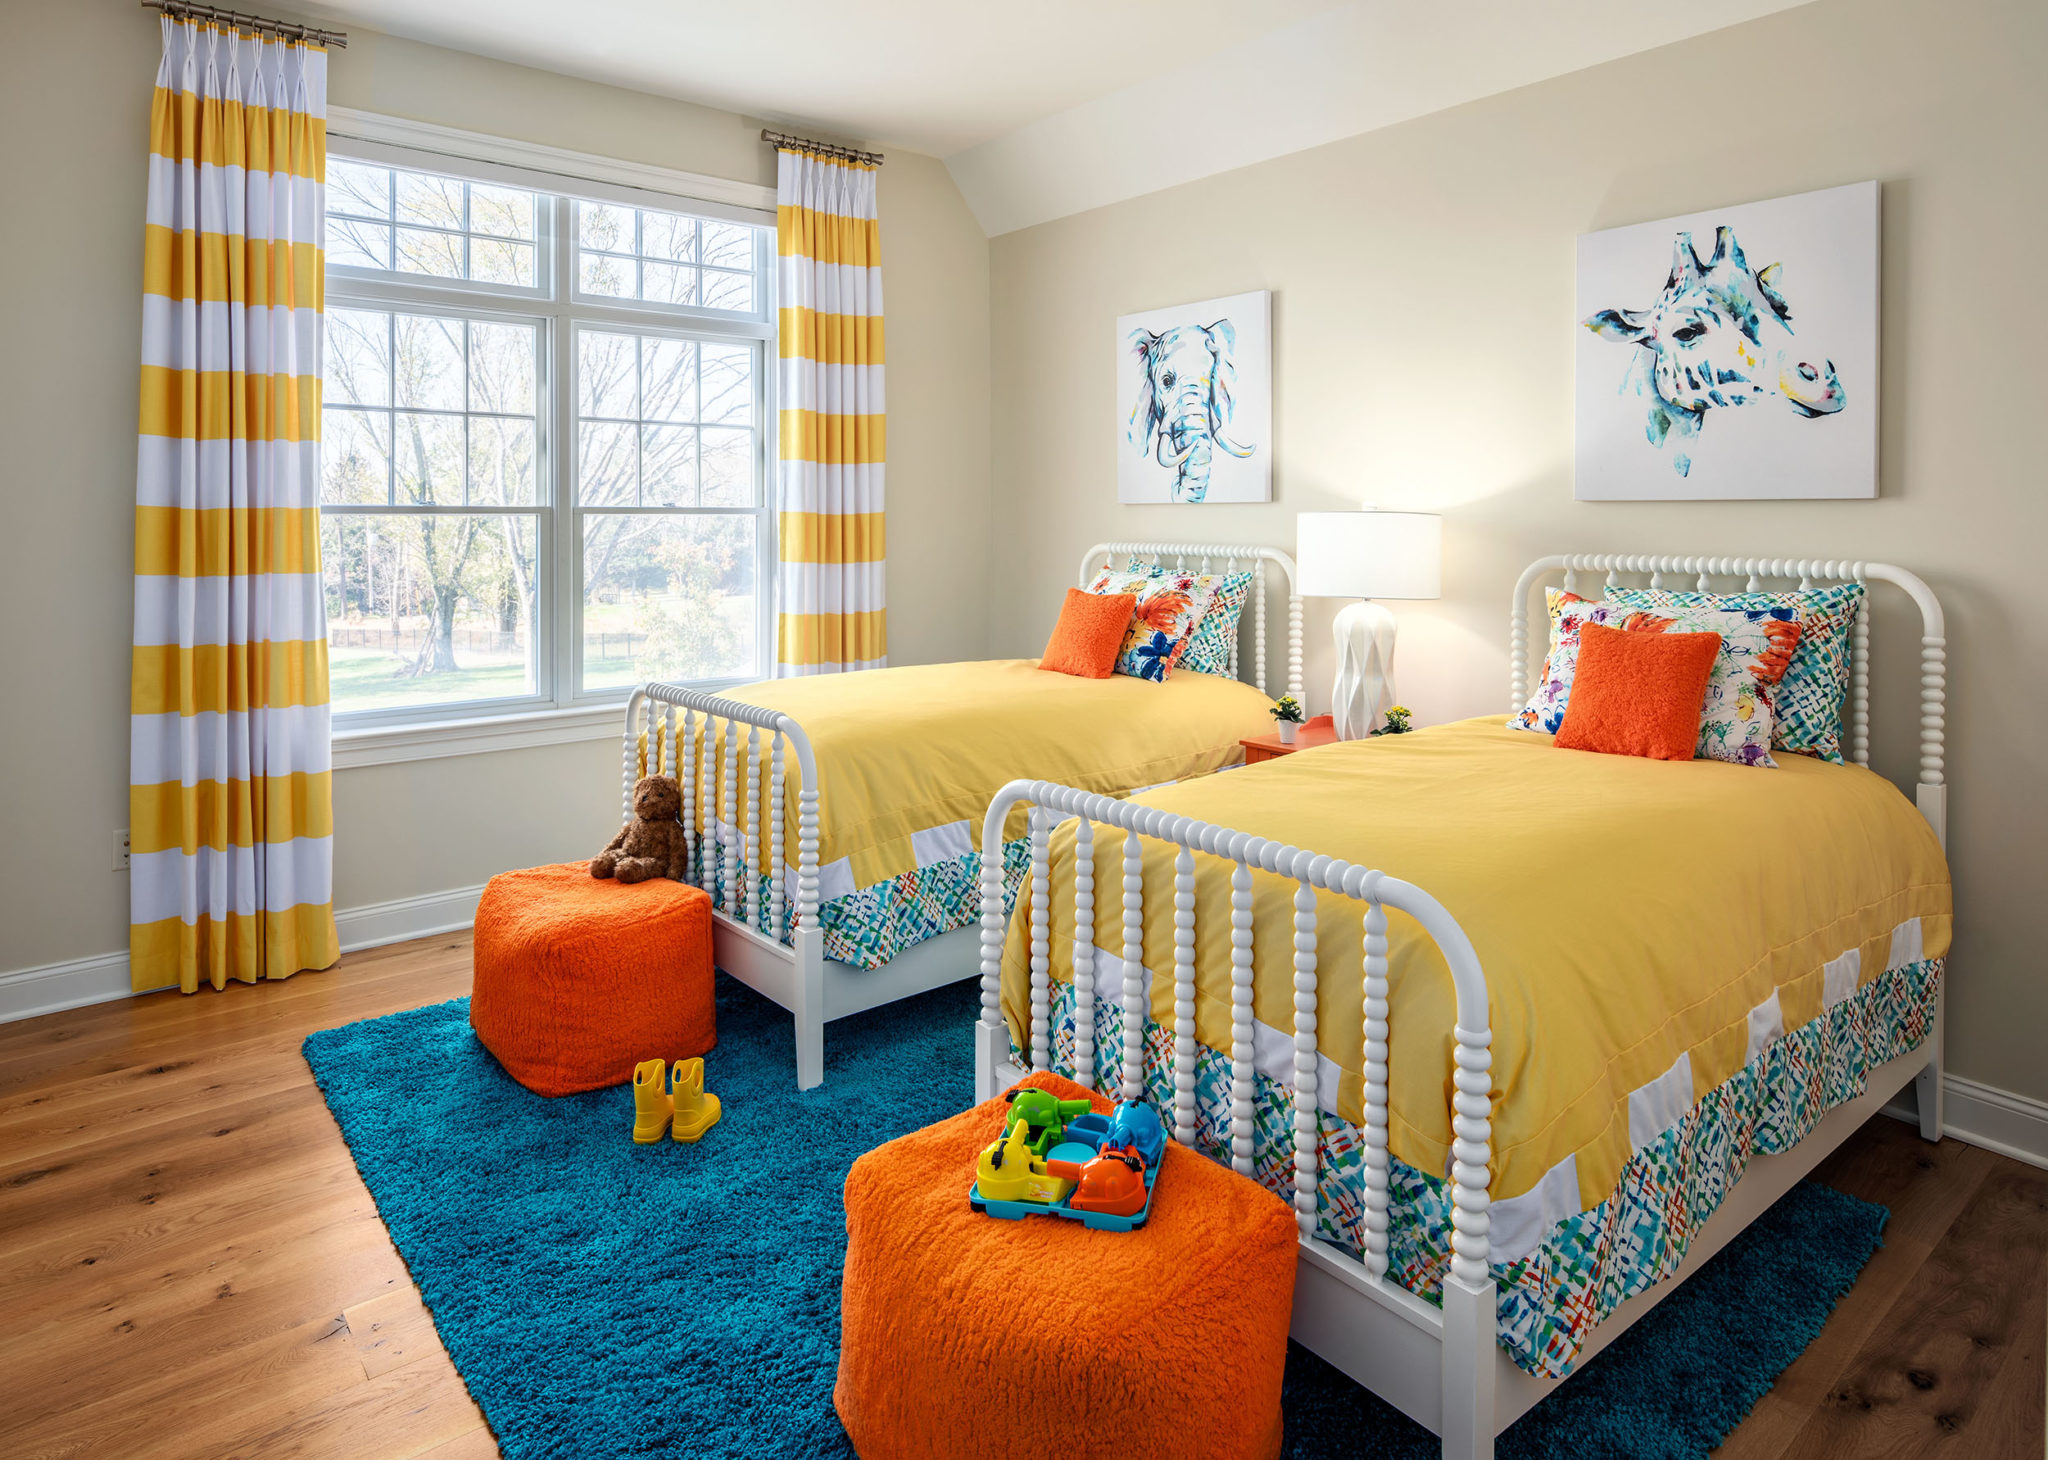 How to Decorate a Children’s Room